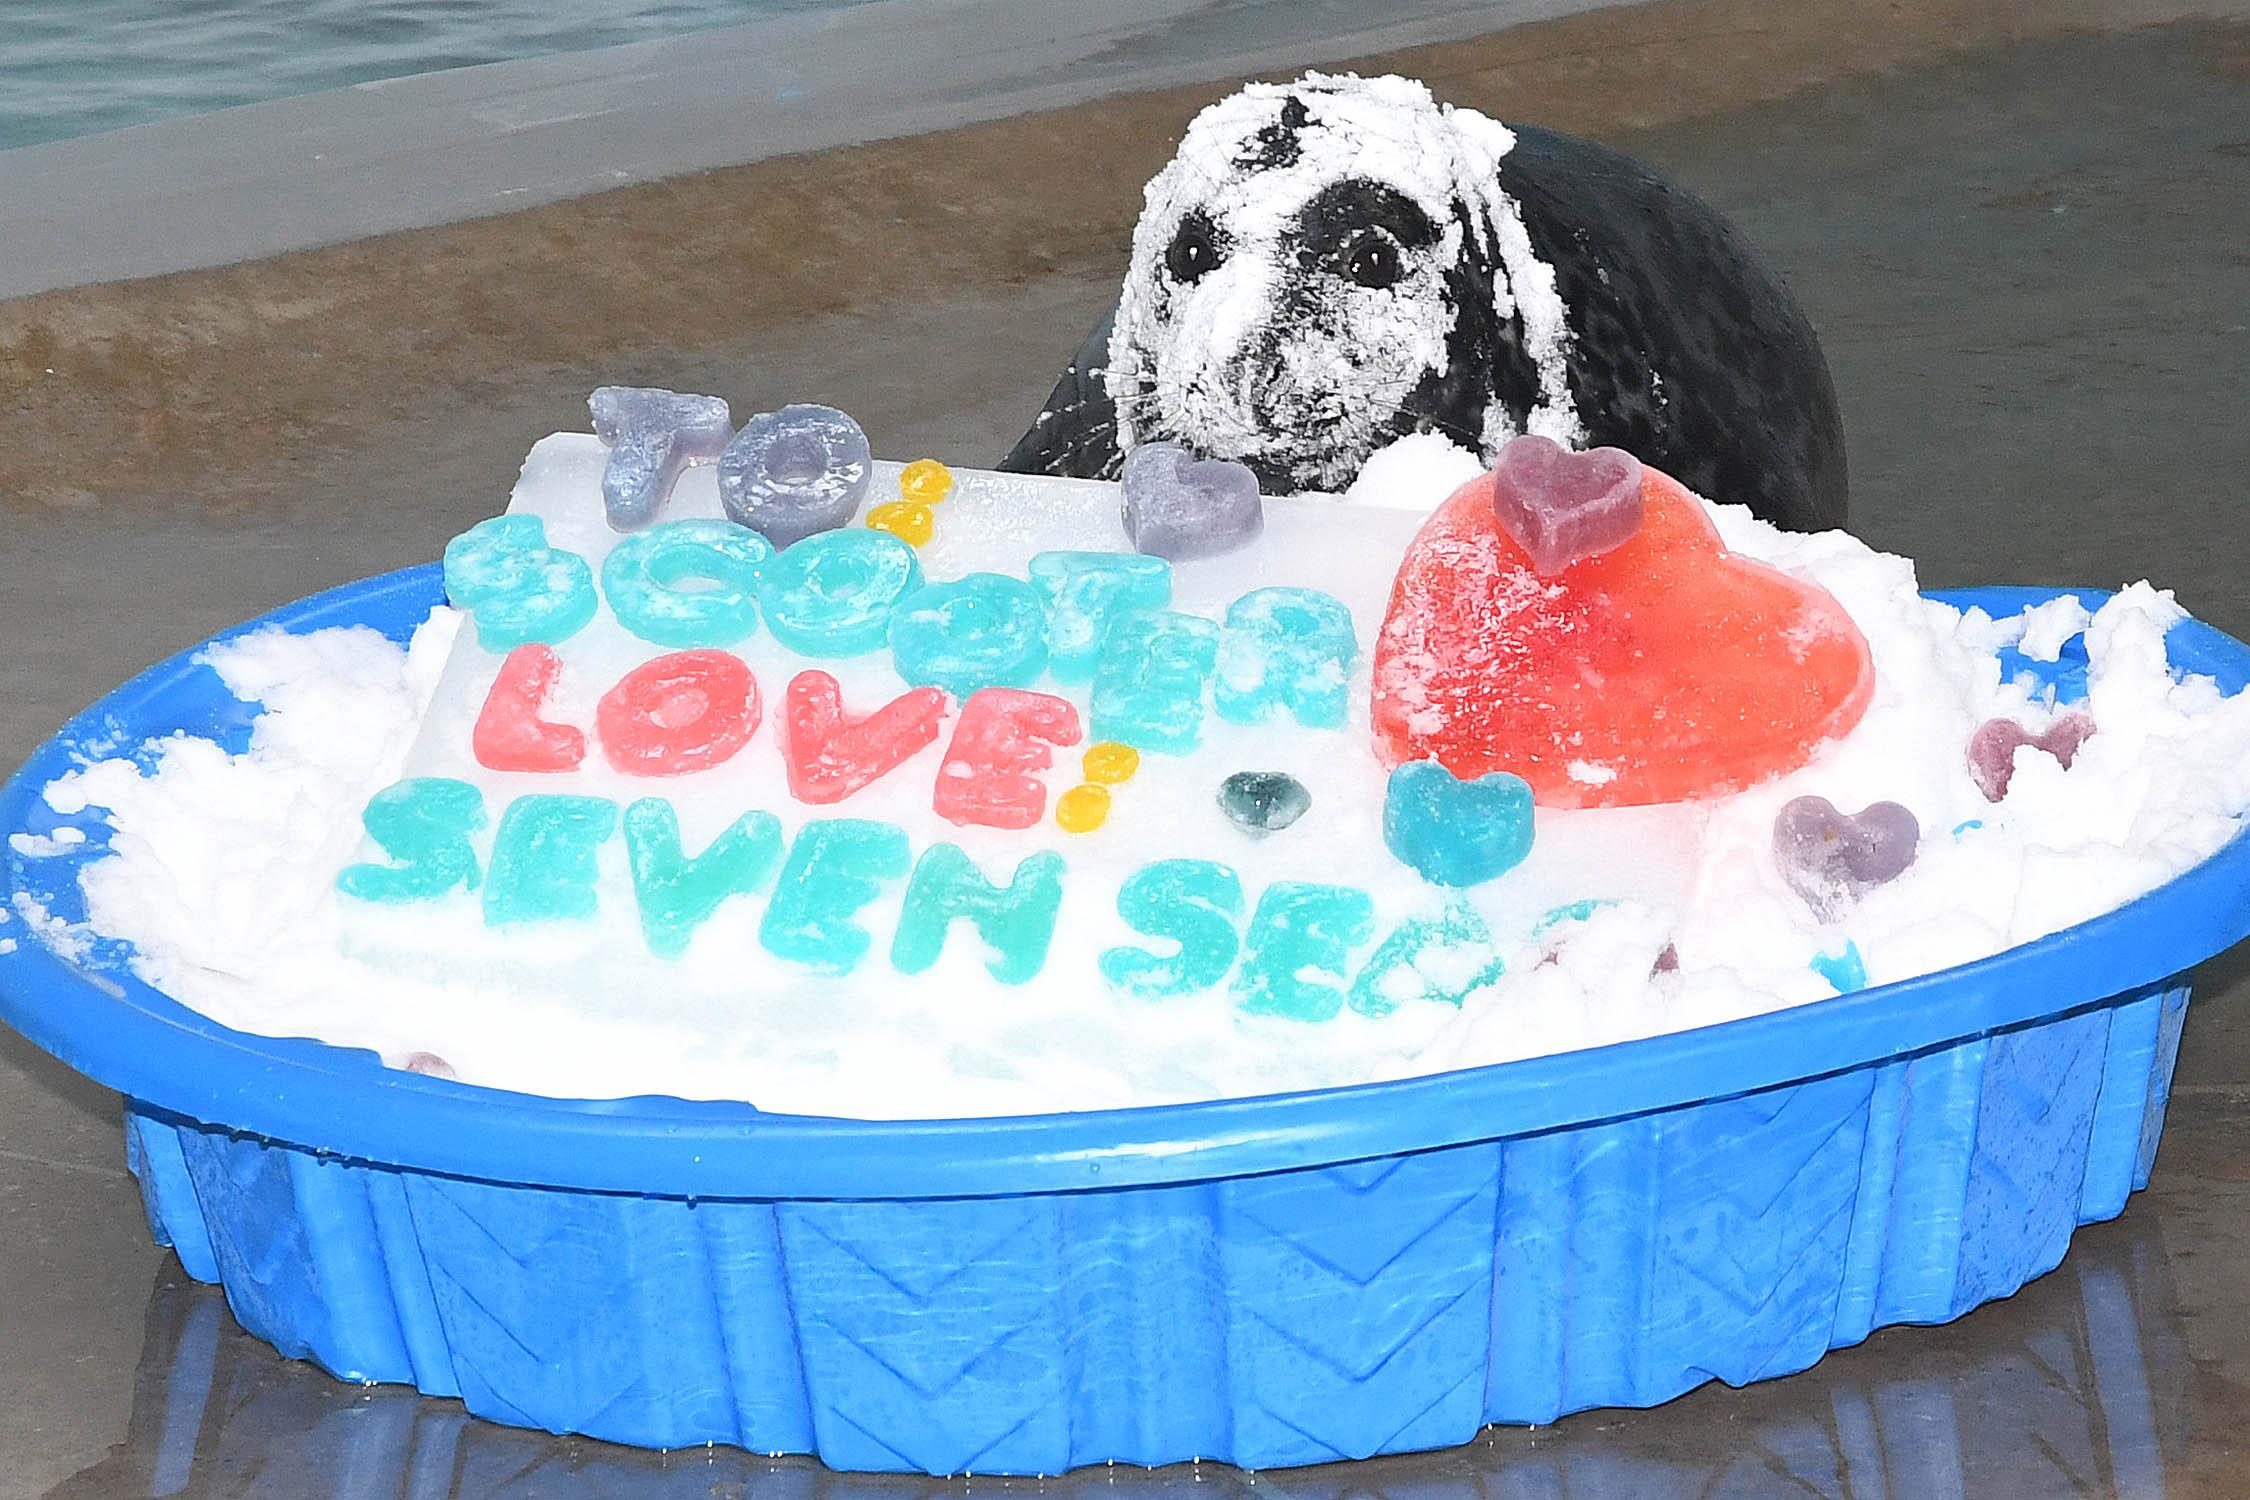 Scooter, a nearly 2-month-old gray seal, enjoys a Valentine’s Day treat of gelatin served with a side of snow. (Jim Schulz / Chicago Zoological Society)